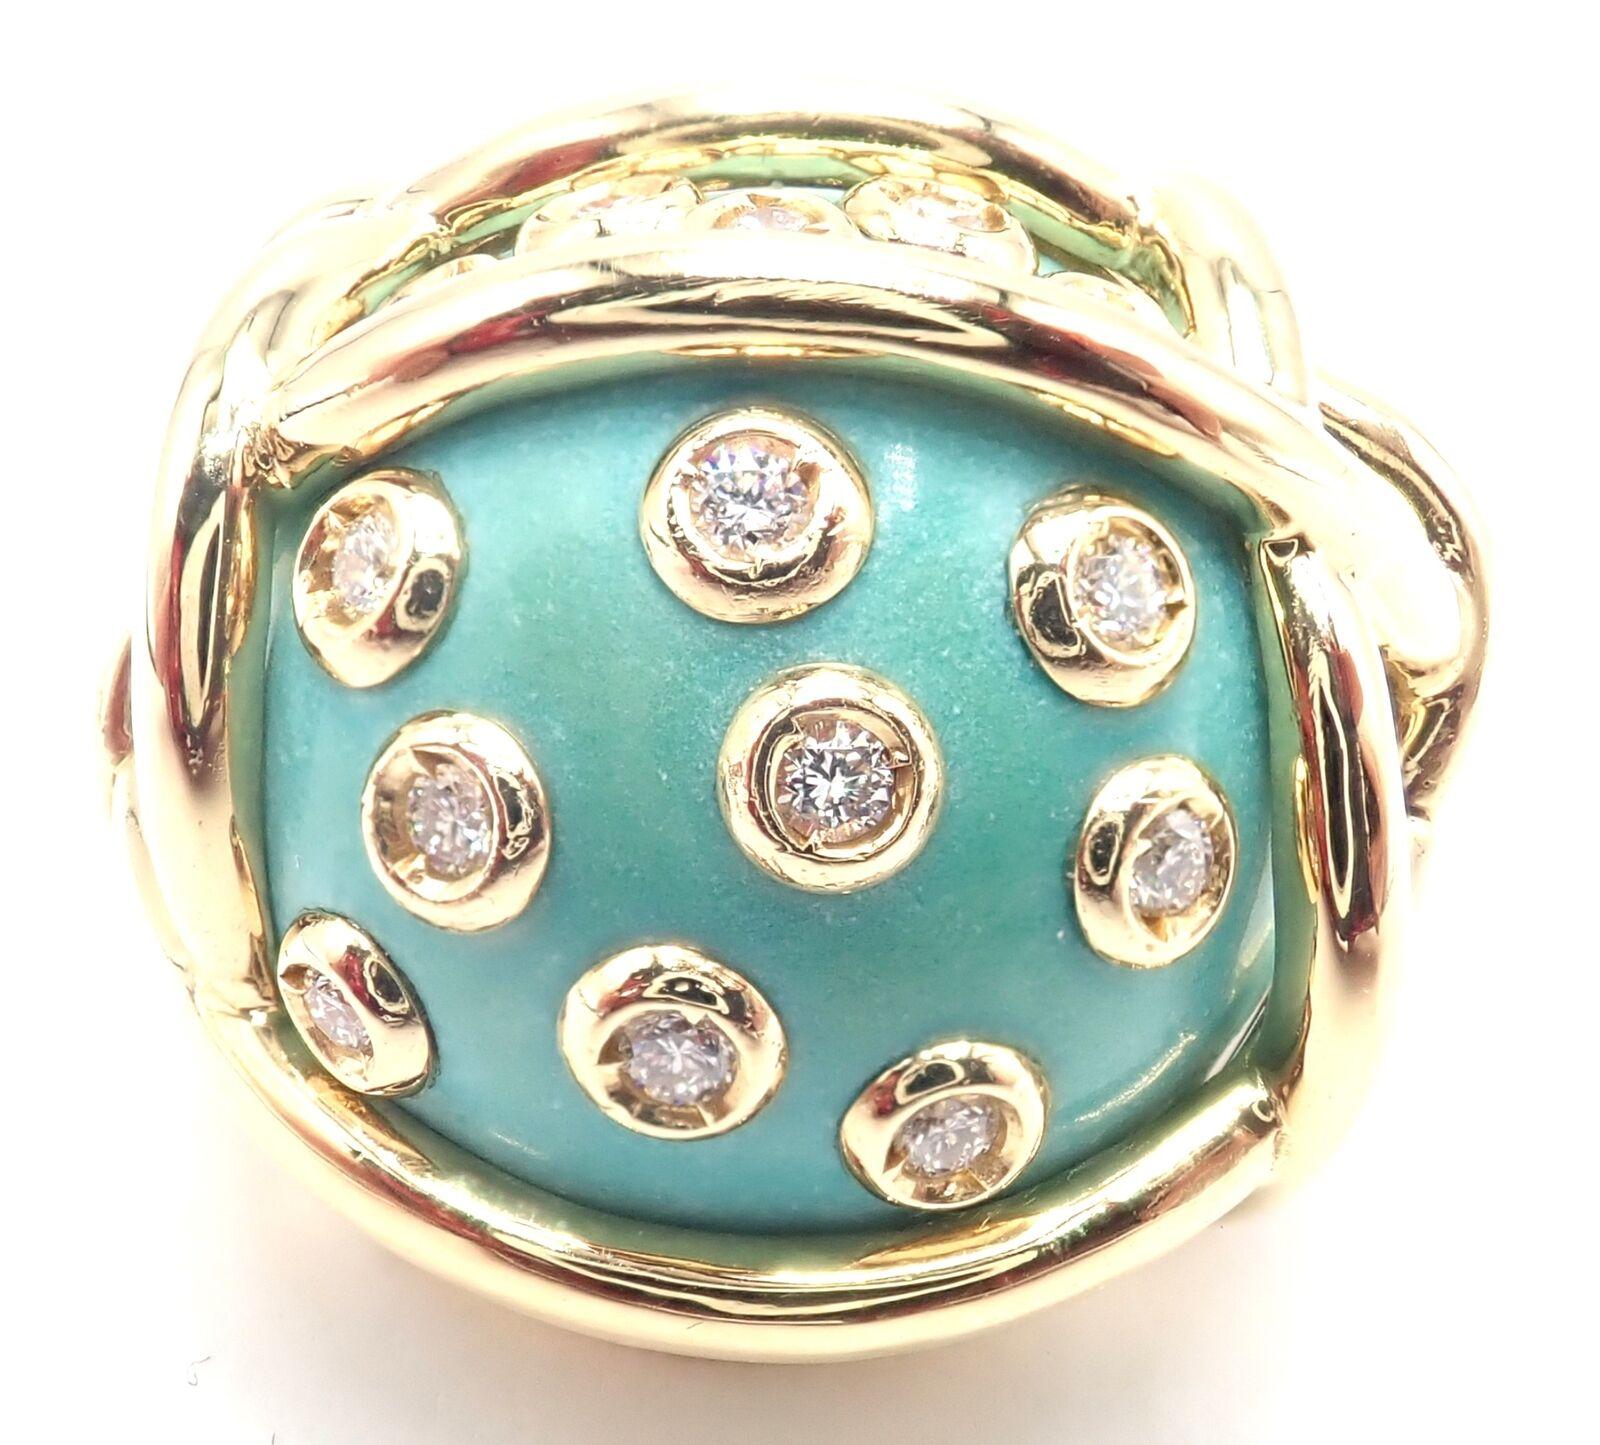 18k Yellow Gold Diamond and Large Turquoise stone vintage Polka Dot ring by Verdura.
With t27 round brilliant cut diamonds VS1 clarity, G color total weight approximately .44ct
1 natural large turquoise stone 18mm
Details: 
Ring Size: 6
Weight: 22.2